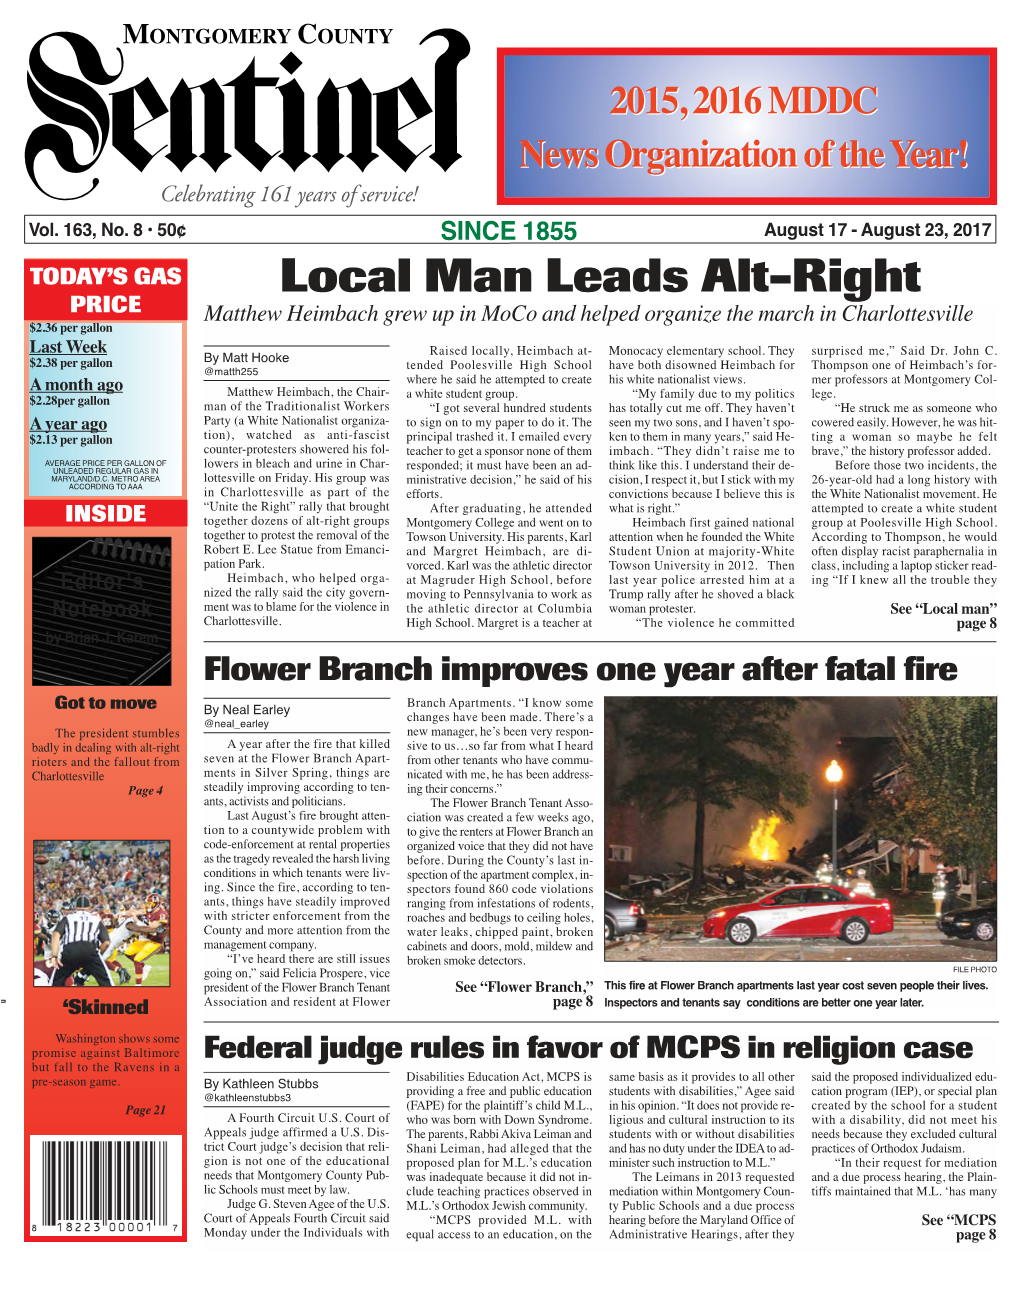 THE MONTGOMERY COUNTY SENTINEL AUGUST 17, 2017 EFLECTIONS the Montgomery County Sentinel, Published Weekly by Berlyn Inc